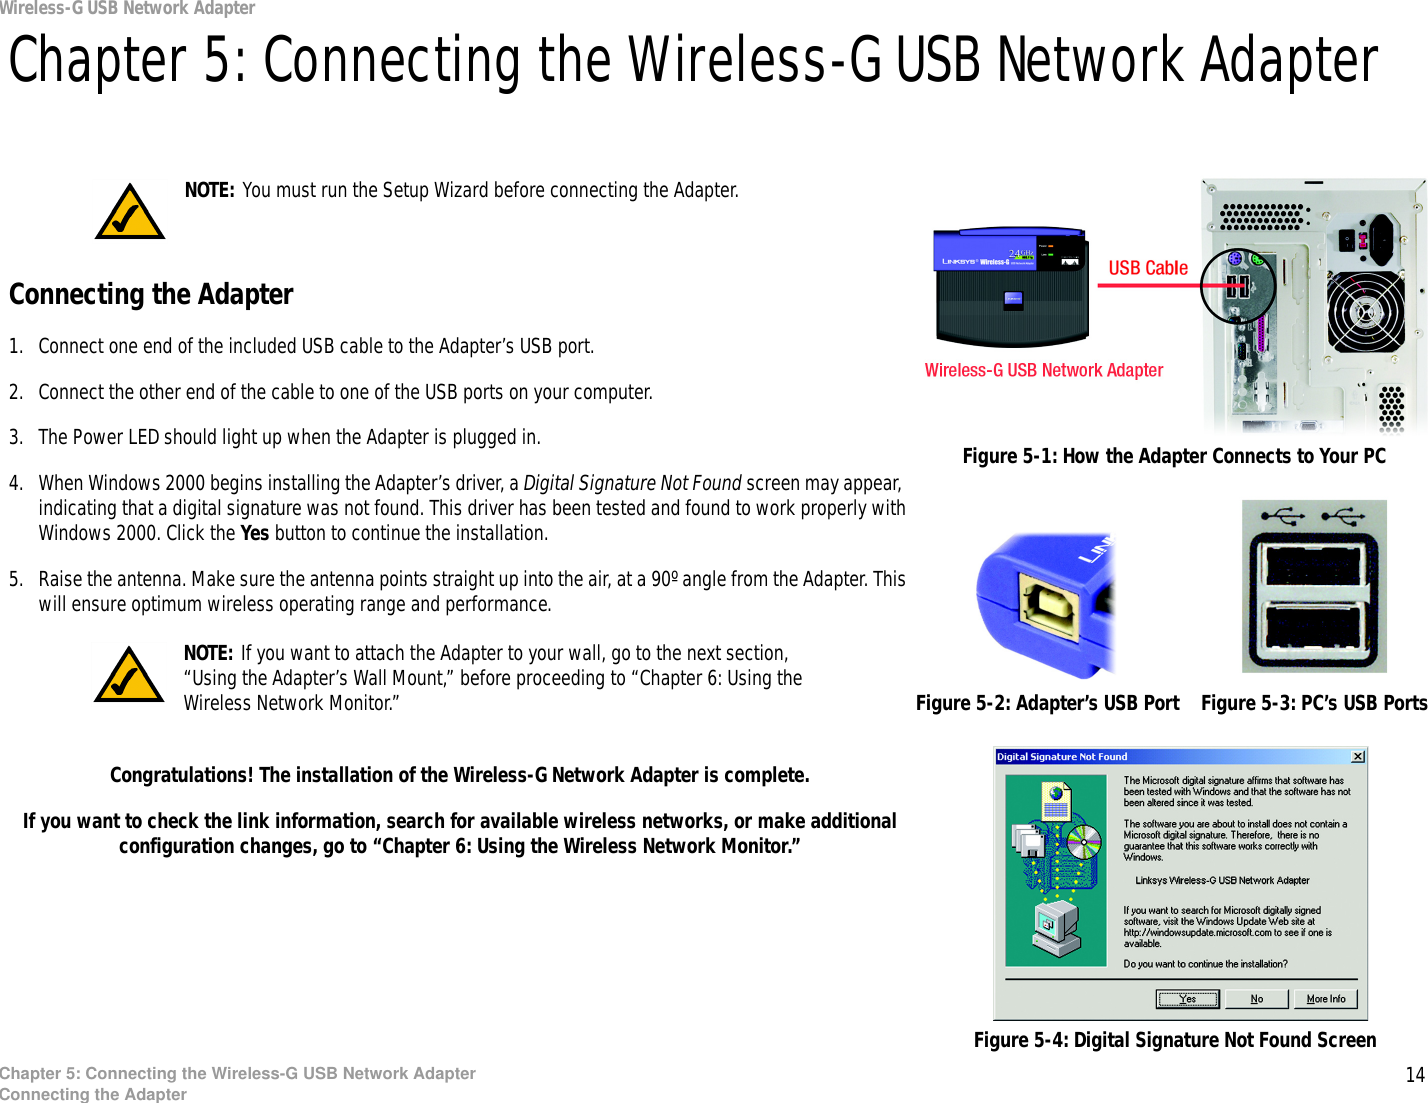 14Chapter 5: Connecting the Wireless-G USB Network AdapterConnecting the AdapterWireless-G USB Network AdapterChapter 5: Connecting the Wireless-G USB Network AdapterConnecting the Adapter1. Connect one end of the included USB cable to the Adapter’s USB port.2. Connect the other end of the cable to one of the USB ports on your computer.3. The Power LED should light up when the Adapter is plugged in.4. When Windows 2000 begins installing the Adapter’s driver, a Digital Signature Not Found screen may appear, indicating that a digital signature was not found. This driver has been tested and found to work properly with Windows 2000. Click the Yes button to continue the installation.5. Raise the antenna. Make sure the antenna points straight up into the air, at a 90º angle from the Adapter. This will ensure optimum wireless operating range and performance.Congratulations! The installation of the Wireless-G Network Adapter is complete. If you want to check the link information, search for available wireless networks, or make additional configuration changes, go to “Chapter 6: Using the Wireless Network Monitor.”Figure 5-1: How the Adapter Connects to Your PCNOTE: You must run the Setup Wizard before connecting the Adapter.Figure 5-2: Adapter’s USB Port Figure 5-3: PC’s USB PortsNOTE: If you want to attach the Adapter to your wall, go to the next section, “Using the Adapter’s Wall Mount,” before proceeding to “Chapter 6: Using the Wireless Network Monitor.”Figure 5-4: Digital Signature Not Found Screen